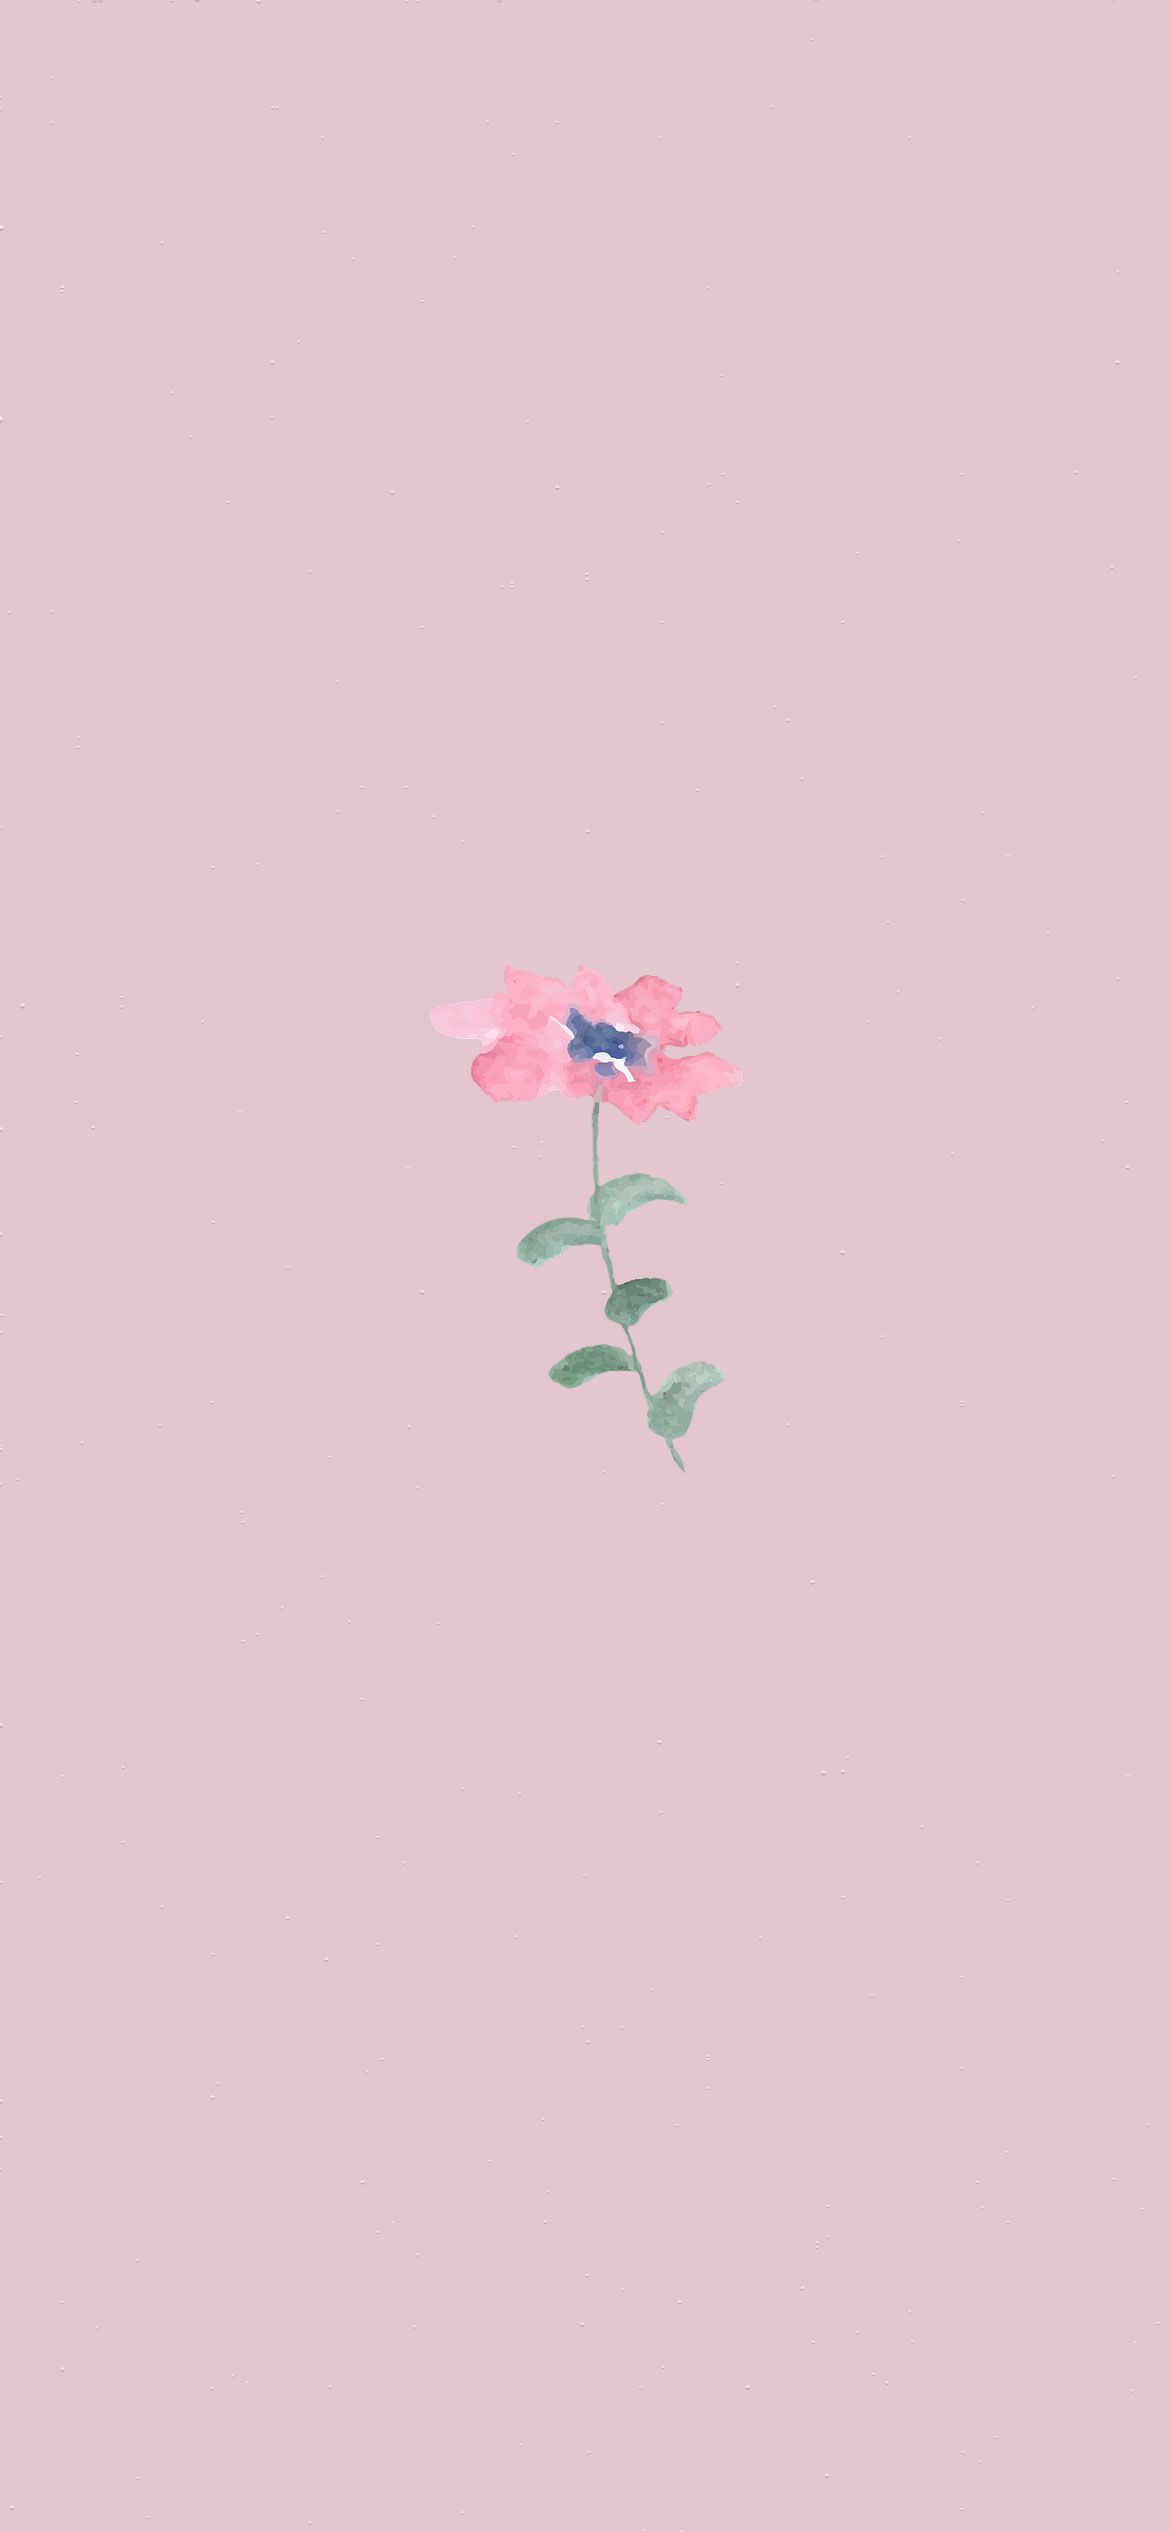 Aesthetic wallpaper for phone. - Pink